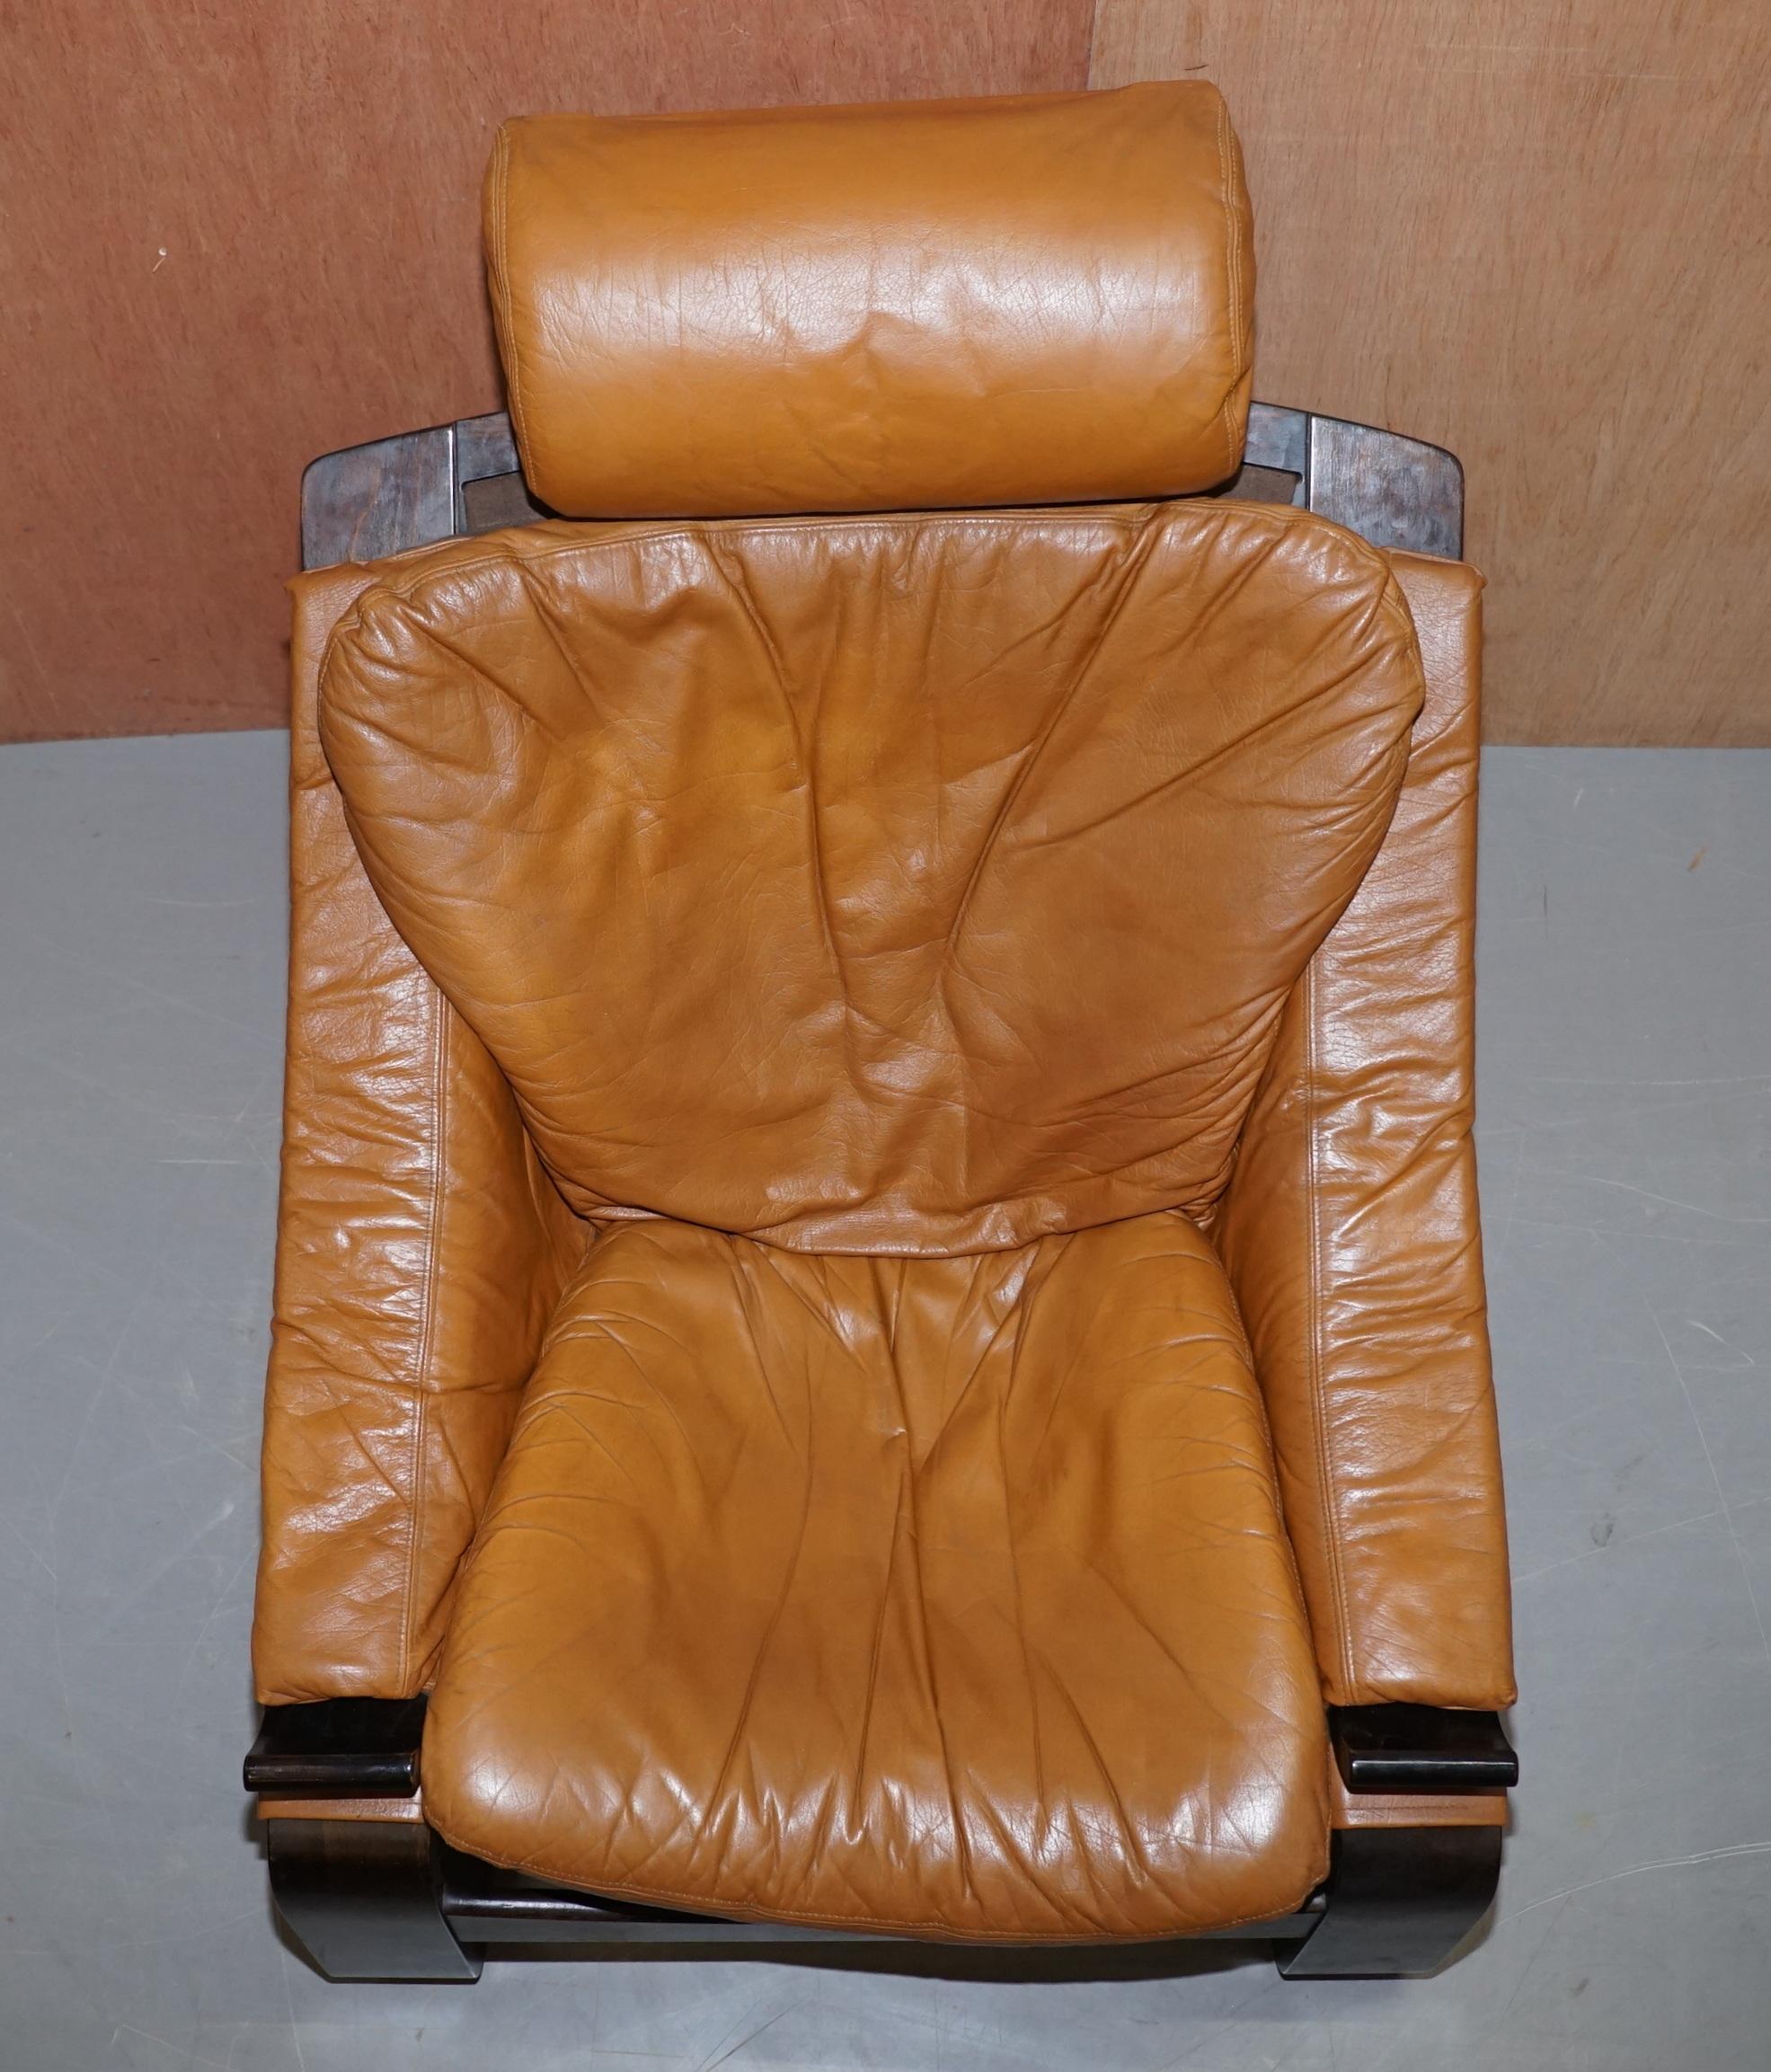 Pair of Midcentury Ake Fribytter Cognac Leather Nelo Mobel Sewdish Armchairs For Sale 6